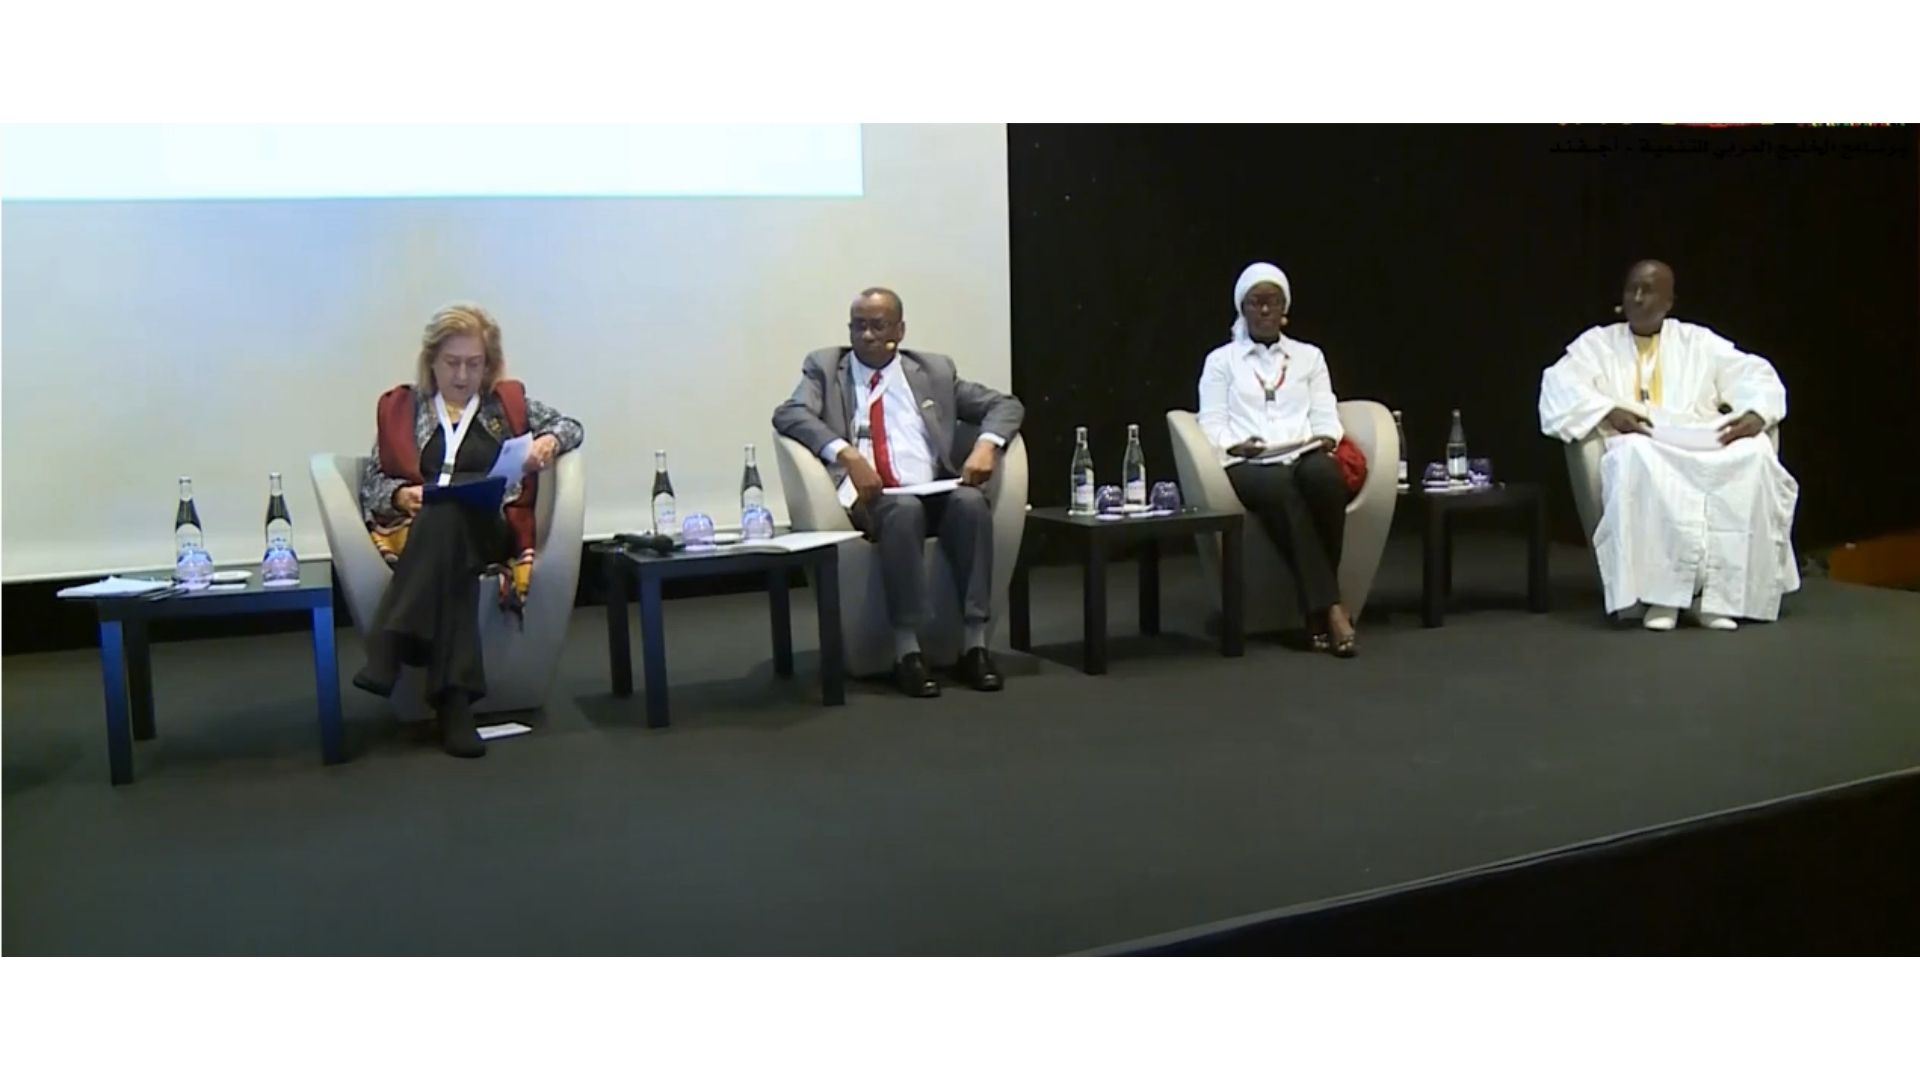 Symposium on “Achieving SDGs in Western and Central Africa through Financial Inclusion”, Session 1